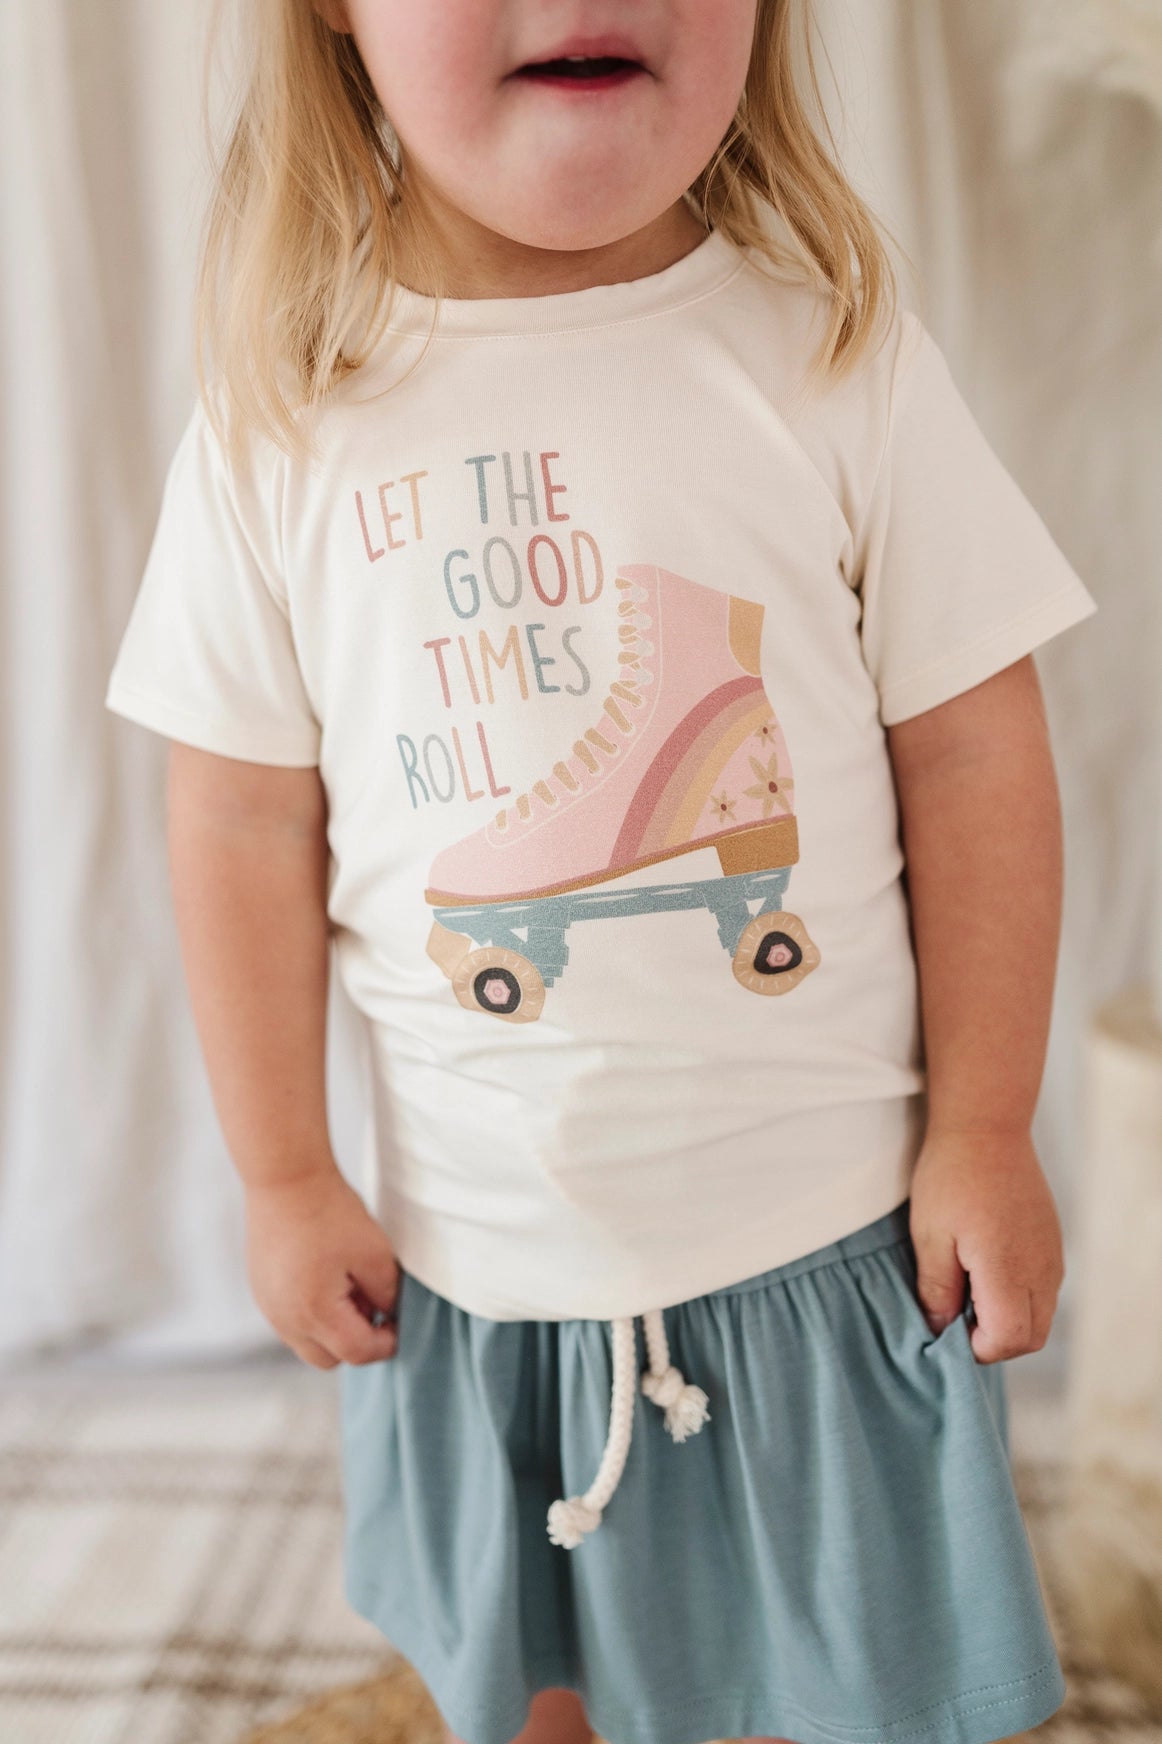 Little girl wearing Babysprouts Clothing Company Girl's Bamboo Tee - Let the Good Times Roll